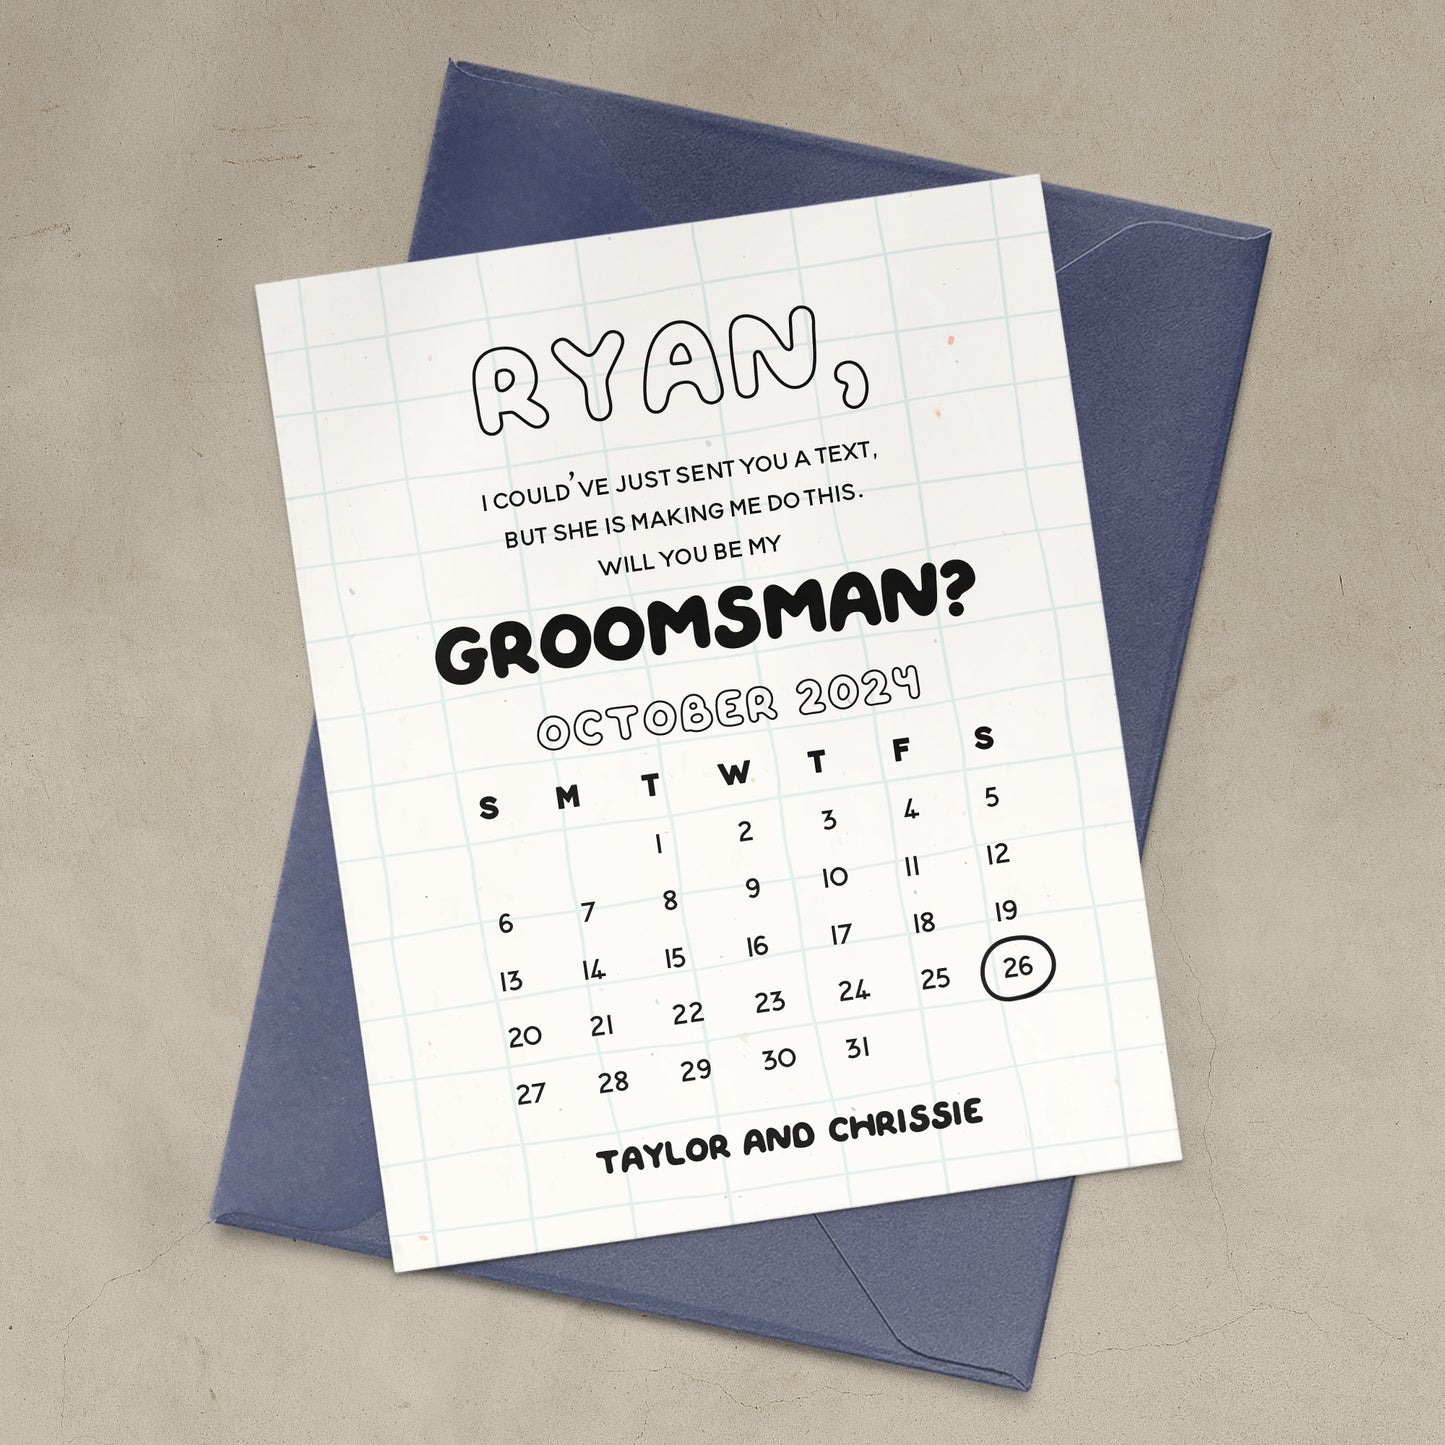 will you be my groomsman proposal card with funny save the date design - XOXOKristen